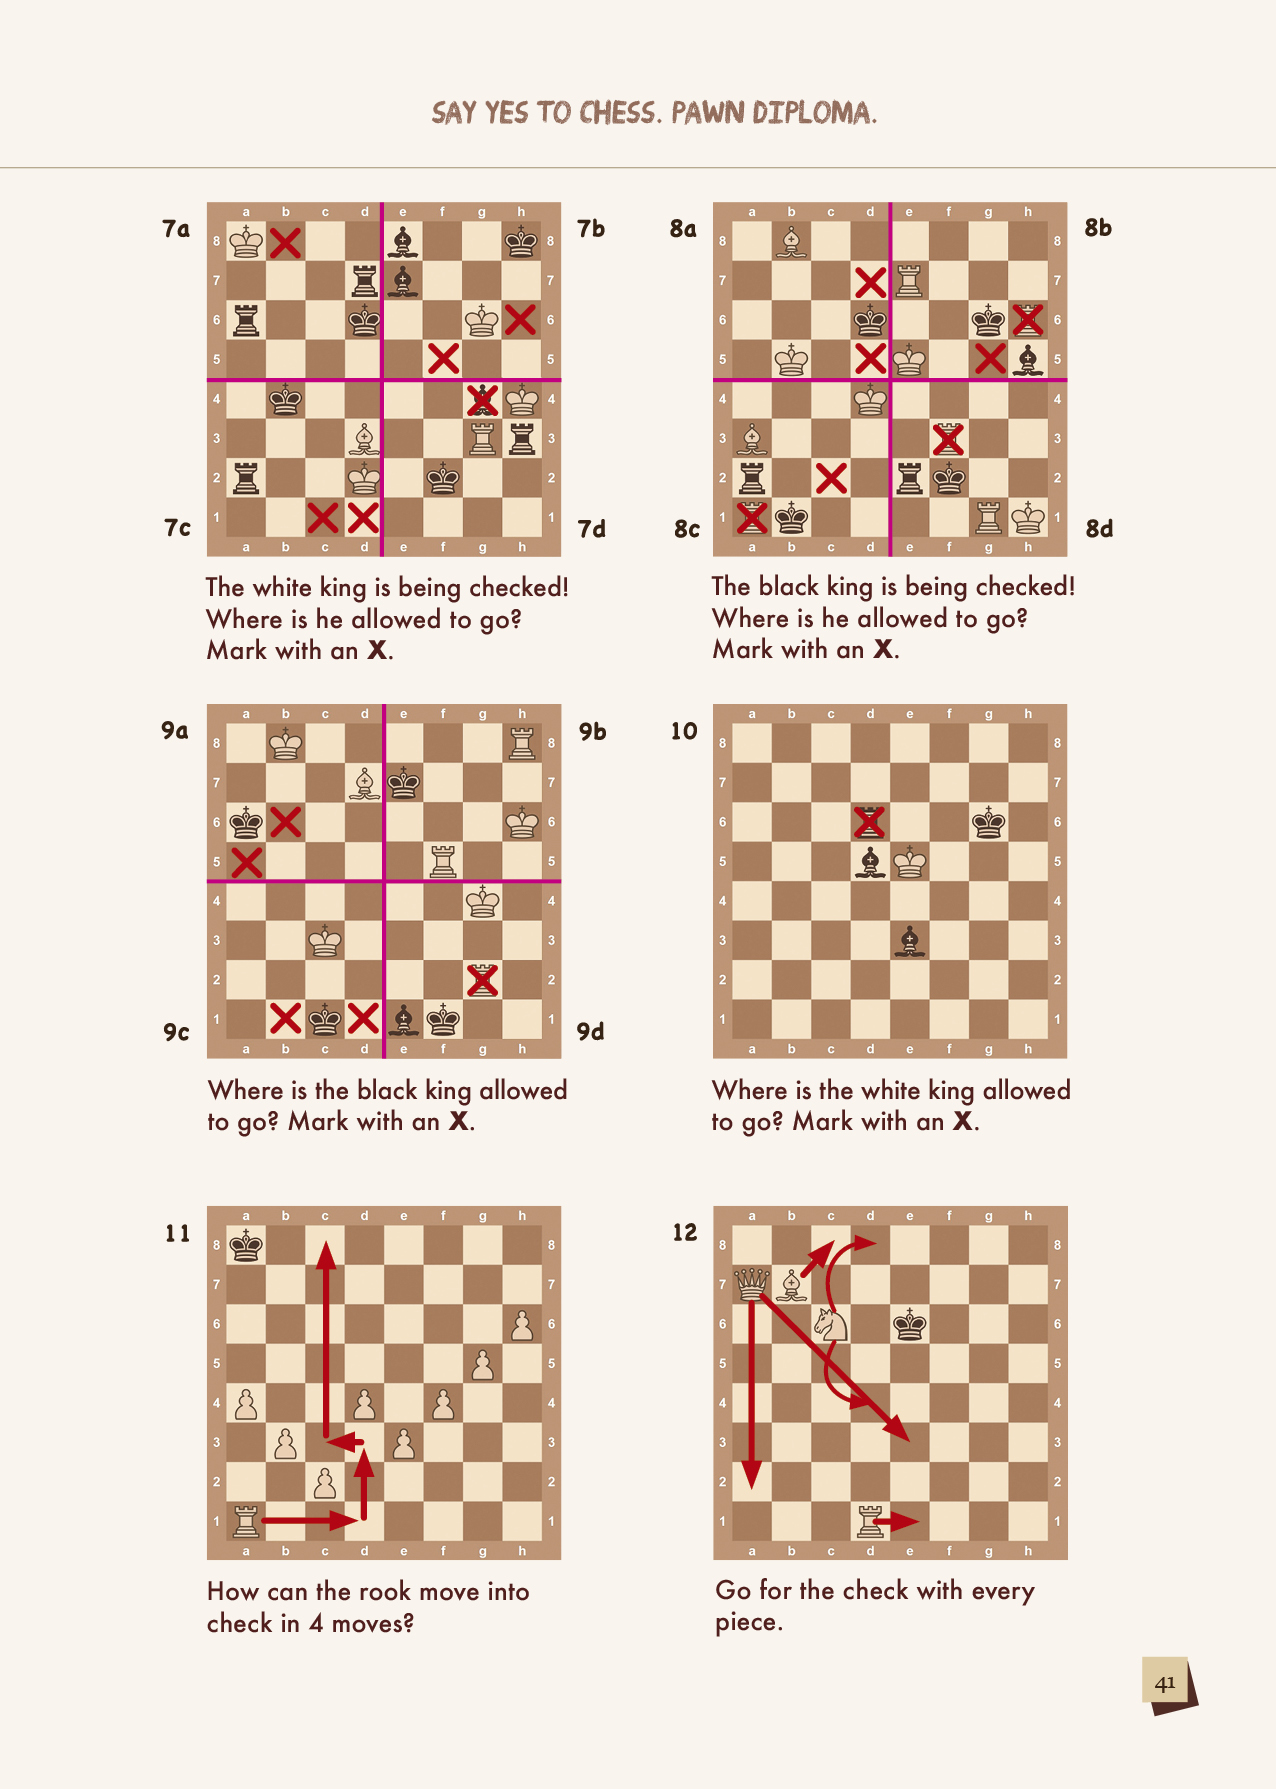 sayyes2chess_solutions_page_41.jpg